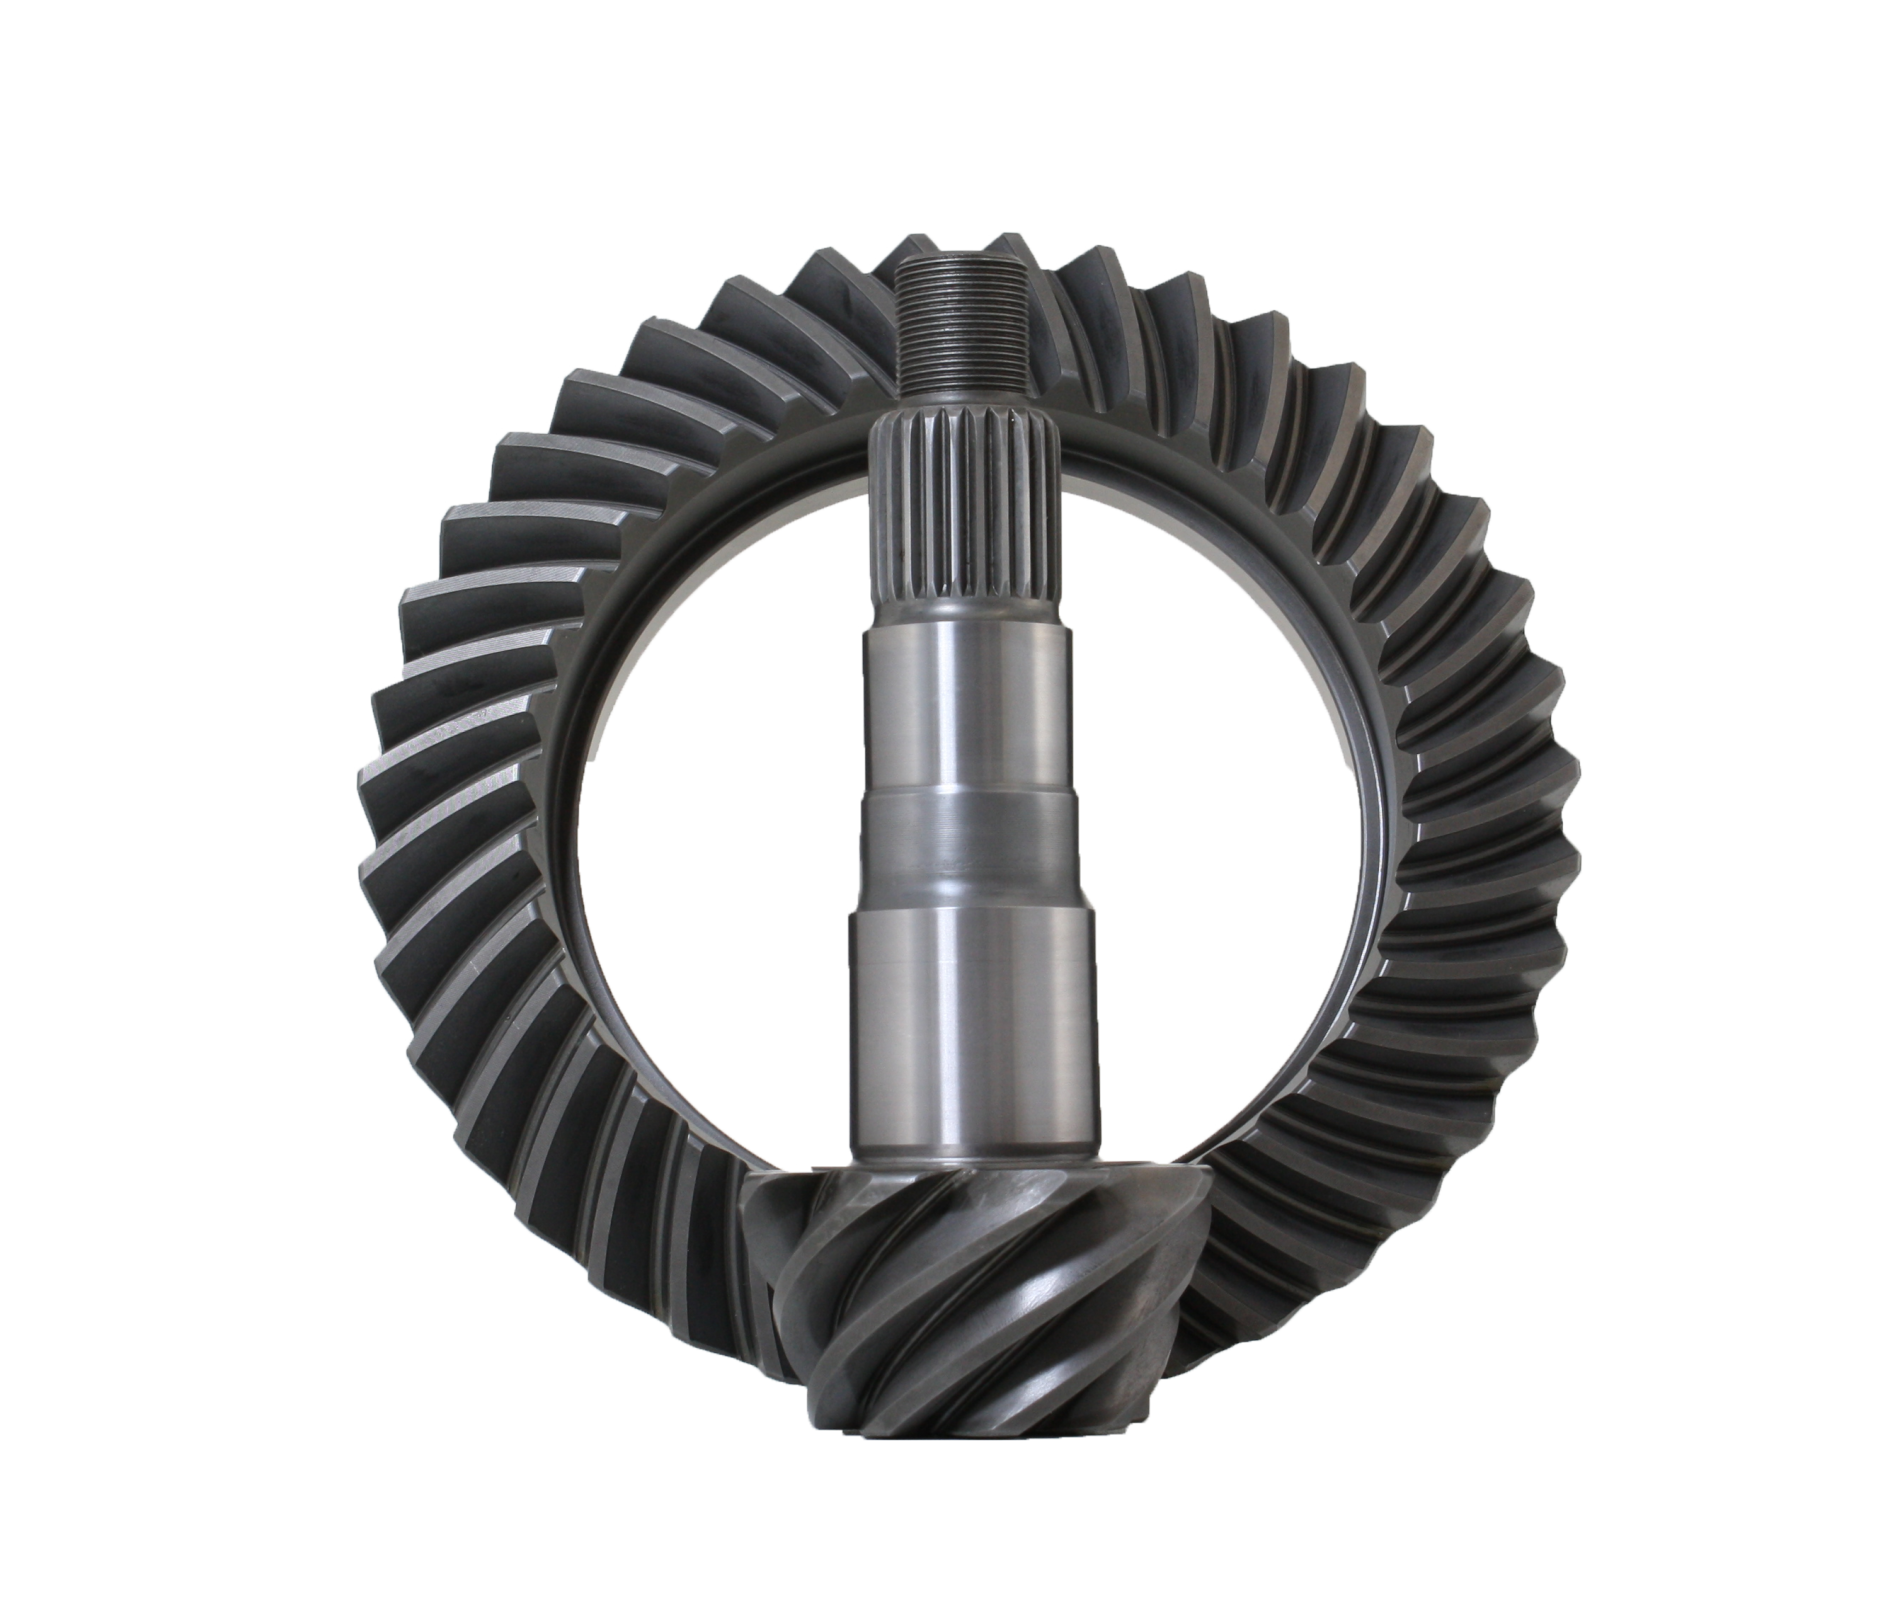 Revolution Gear Dana 44 5.13 Reverse Thick Ring and Pinion Gear Set, Front - JK Rubicon Only